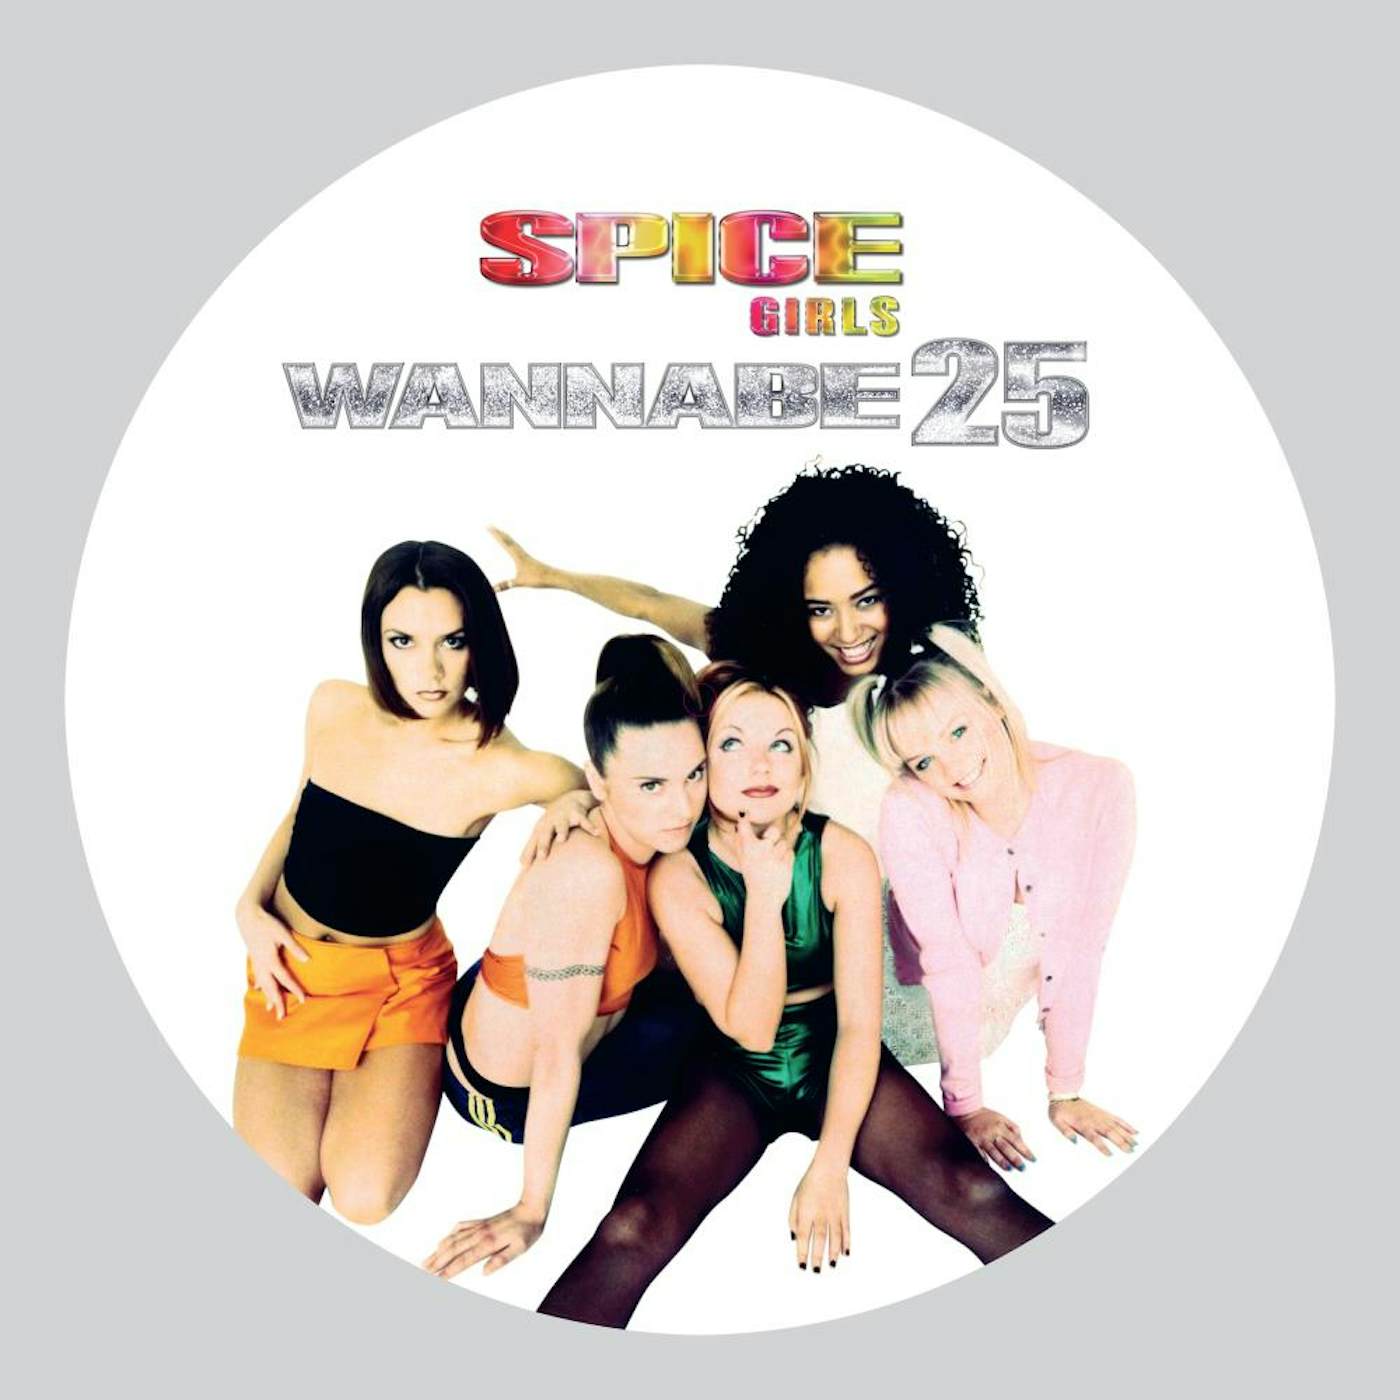 Spice Girls WANNABE 25 (PICTURE DISC) Vinyl Record